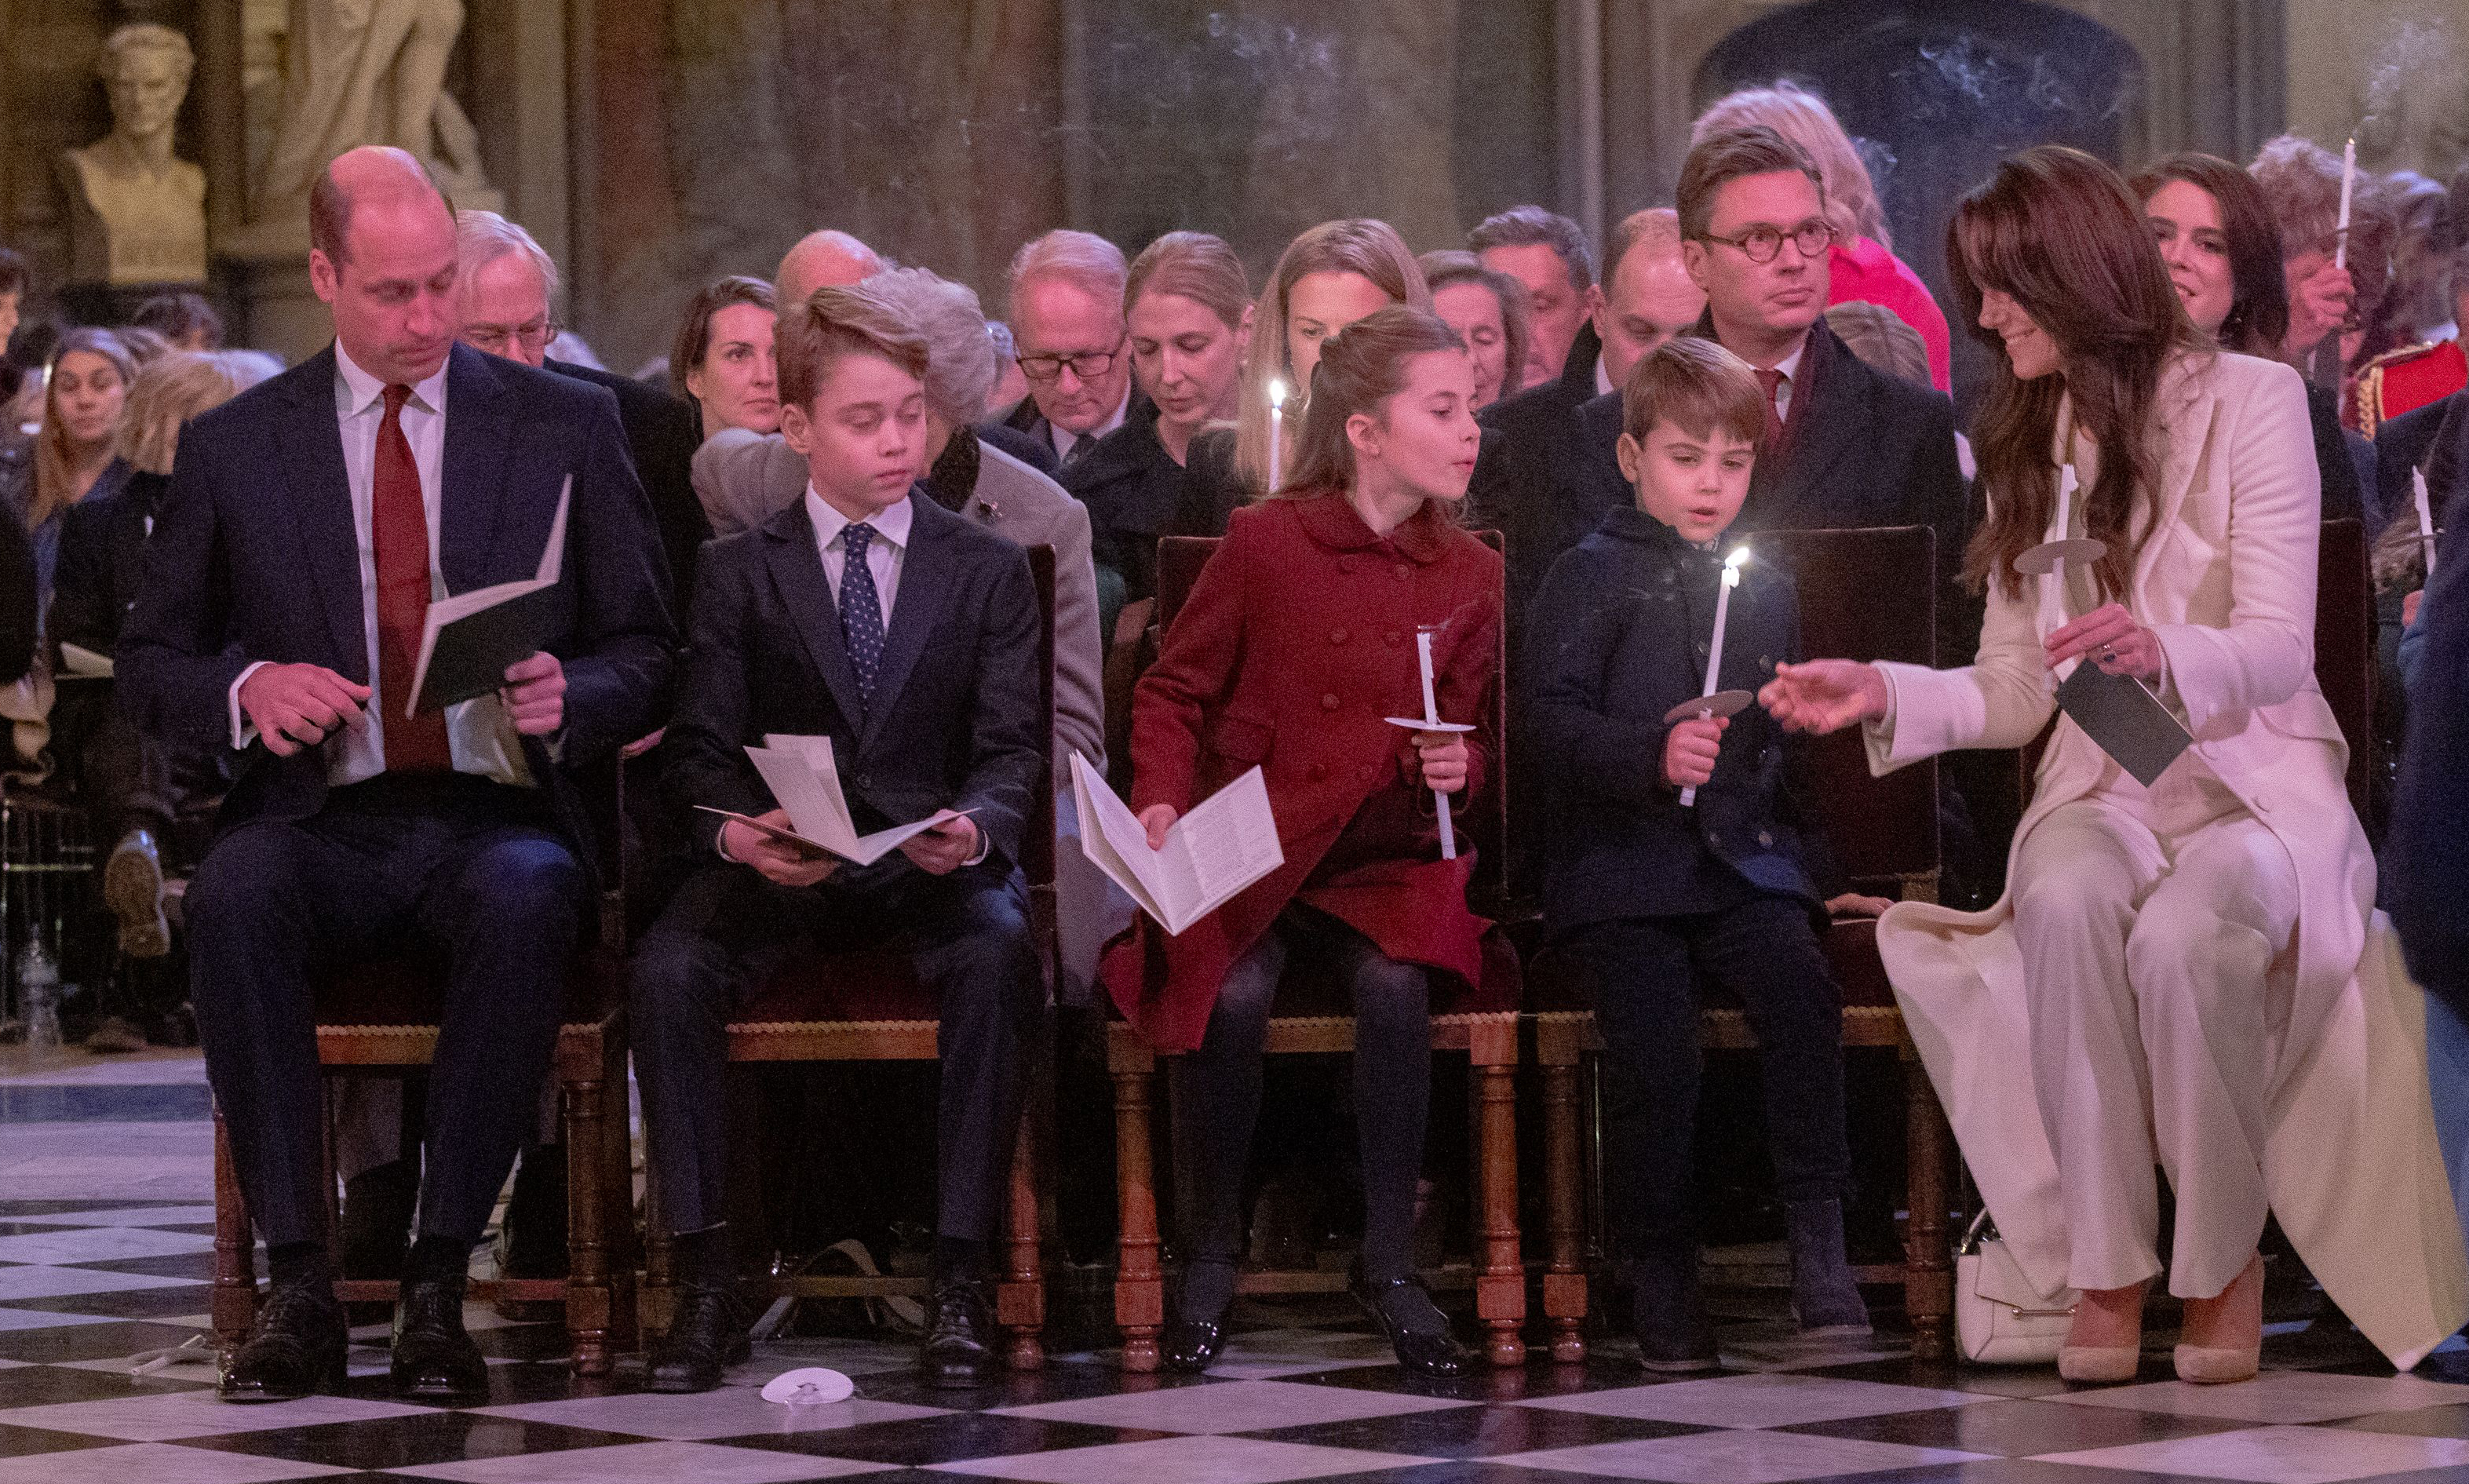 <p><span>Prince George, Princess Charlotte and Princess Kate watched on as Prince Louis took his time extinguishing his candle at the taping of the "Royal Carols: Together at Christmas" TV special -- which they attended with <a href="https://www.wonderwall.com/celebrity/profiles/overview/prince-william-482.article">Prince William</a> -- at Westminster Abbey in London on Dec. 8, 2023.</span></p><p>MORE: <a href="https://www.wonderwall.com/celebrity/royals/trooping-the-colour-2023-king-charles-iii-celebrates-the-first-of-his-reign-752078.gallery">The best photos from Trooping the Colour 2023</a></p>